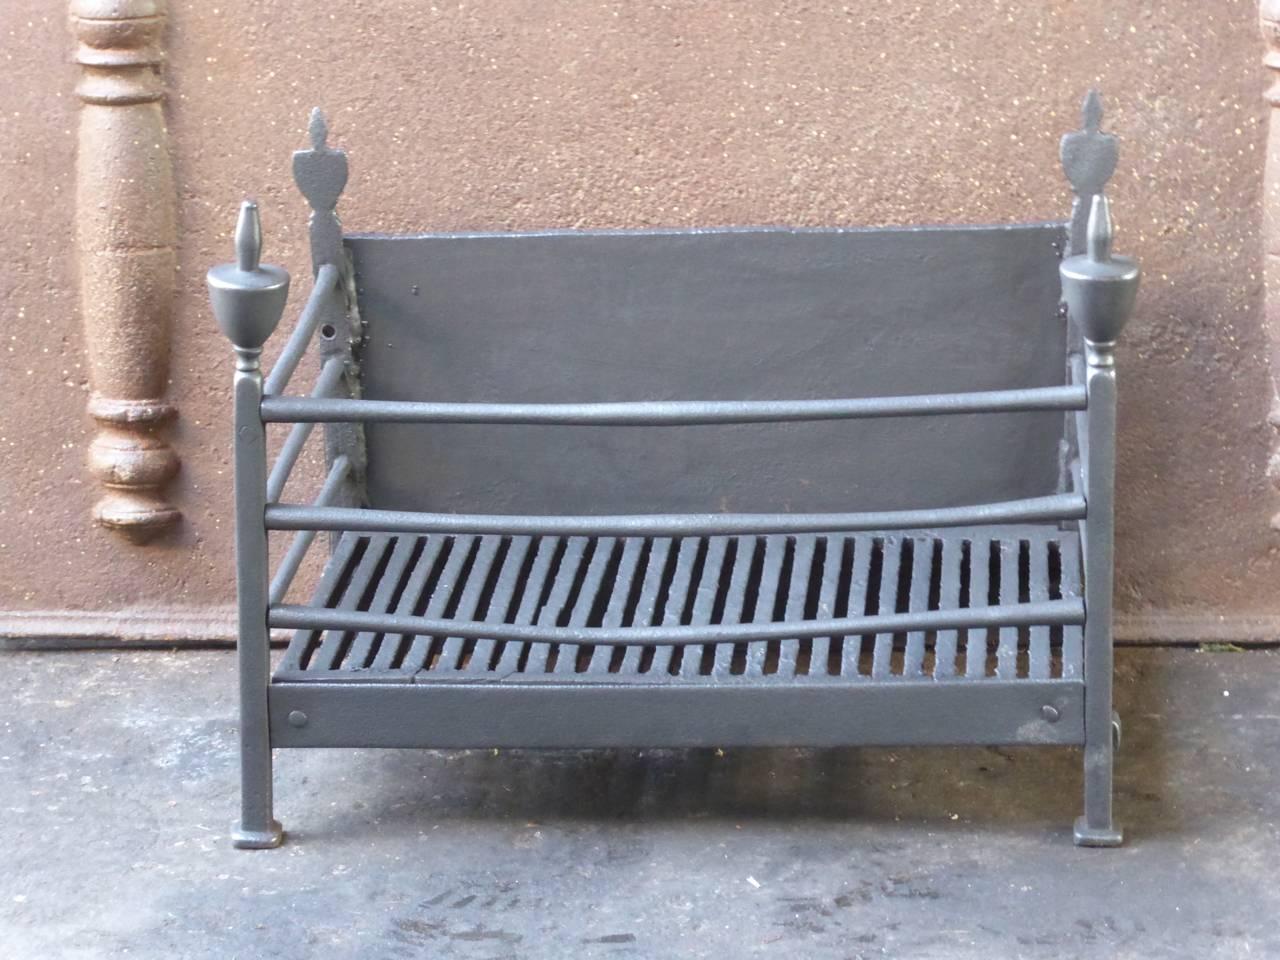 18th-19th century English Georgian fire grate made of cast iron and wrought iron.

We have a unique and specialized collection of antique and used fireplace accessories consisting of more than 1000 listings at 1stdibs. Amongst others, we always have